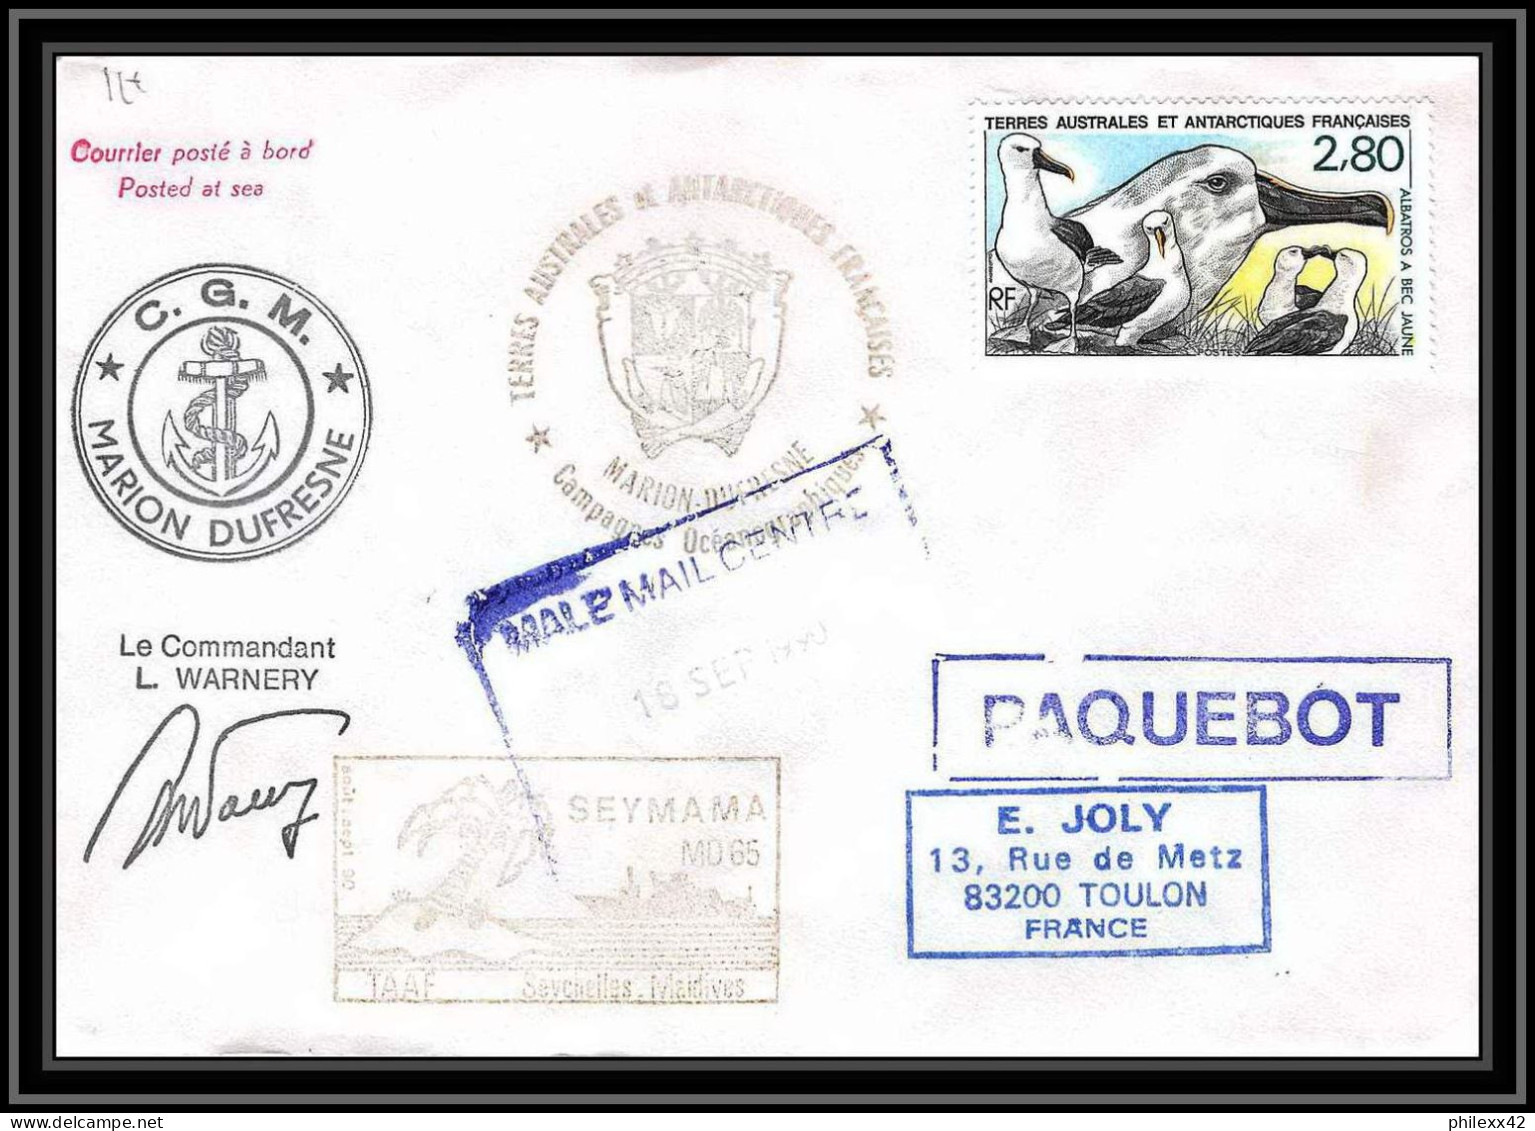 1098 Taaf Terres Australes Antarctic Lettre (cover) N° 18/09/1990 Dufresne PAQUEBOT Signé Signed Autograph - Lettres & Documents